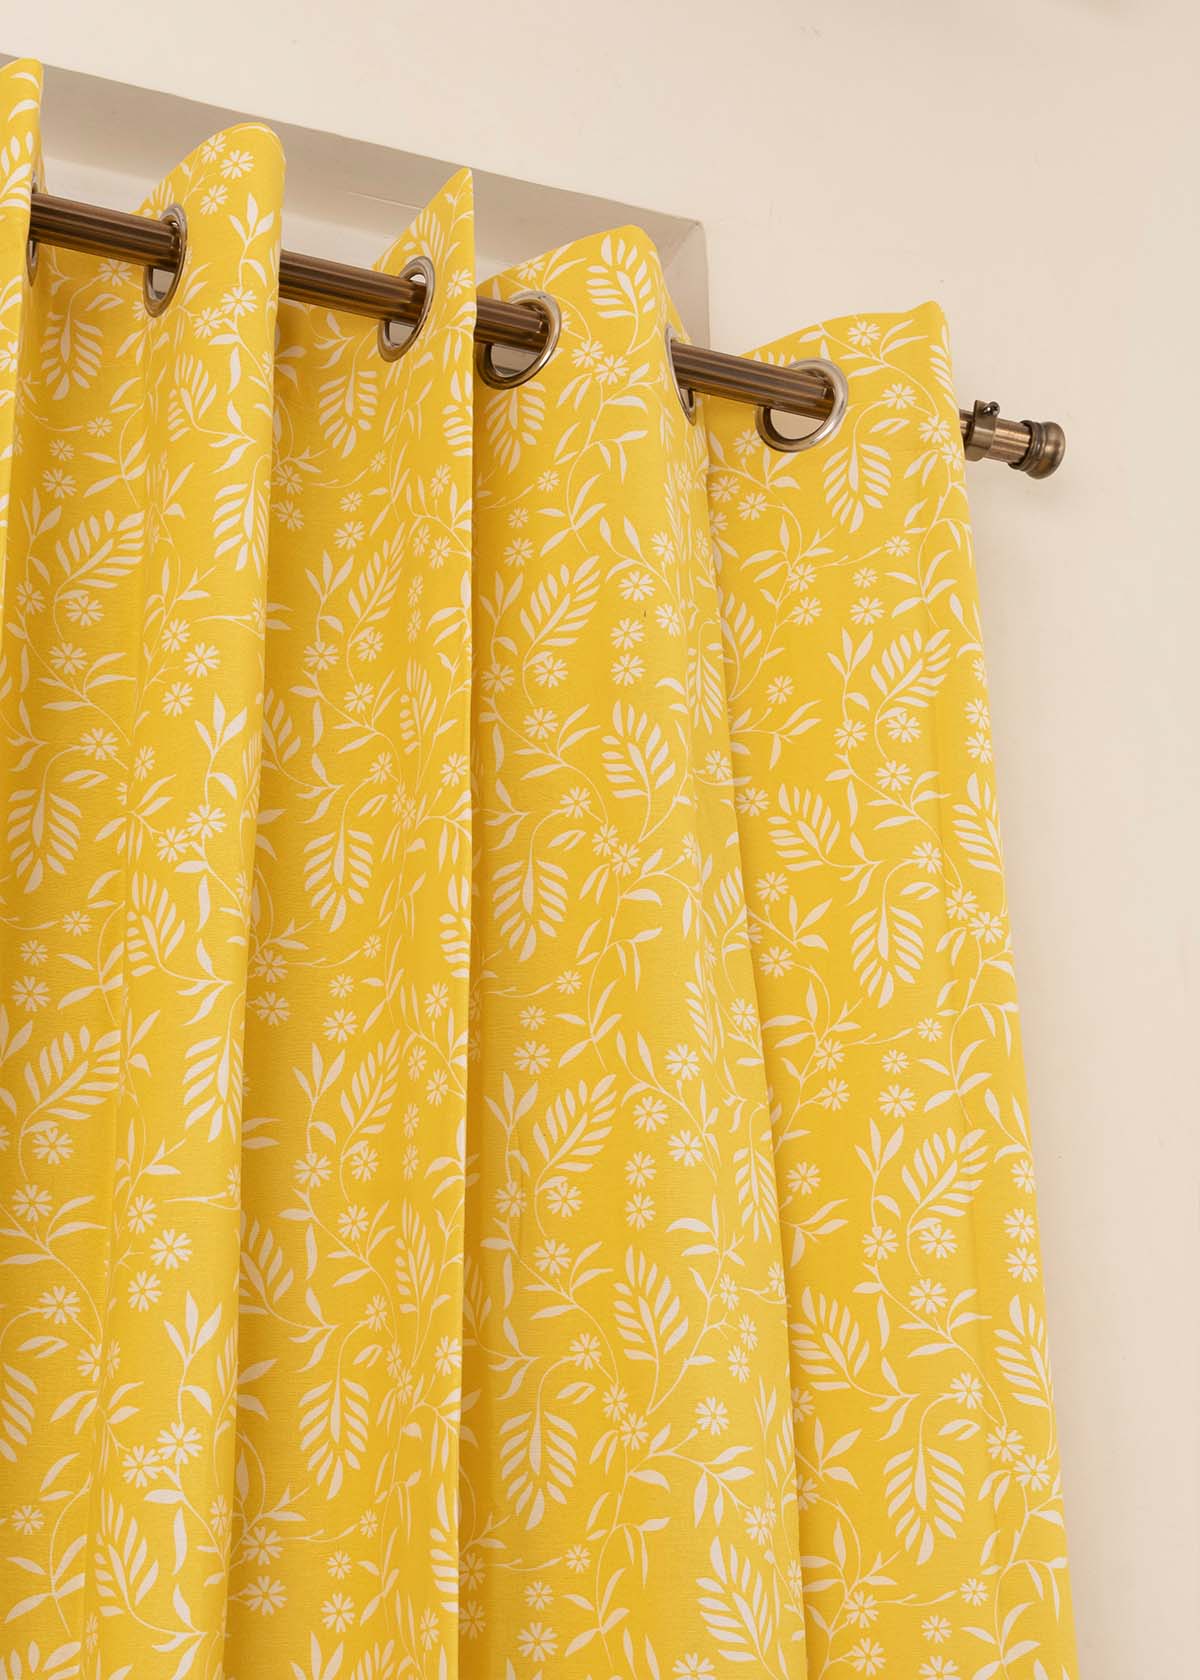 Yellow Daisy 100% Customizable Cotton floral curtain for kids room, living room & bed room - Room darkening - Yellow